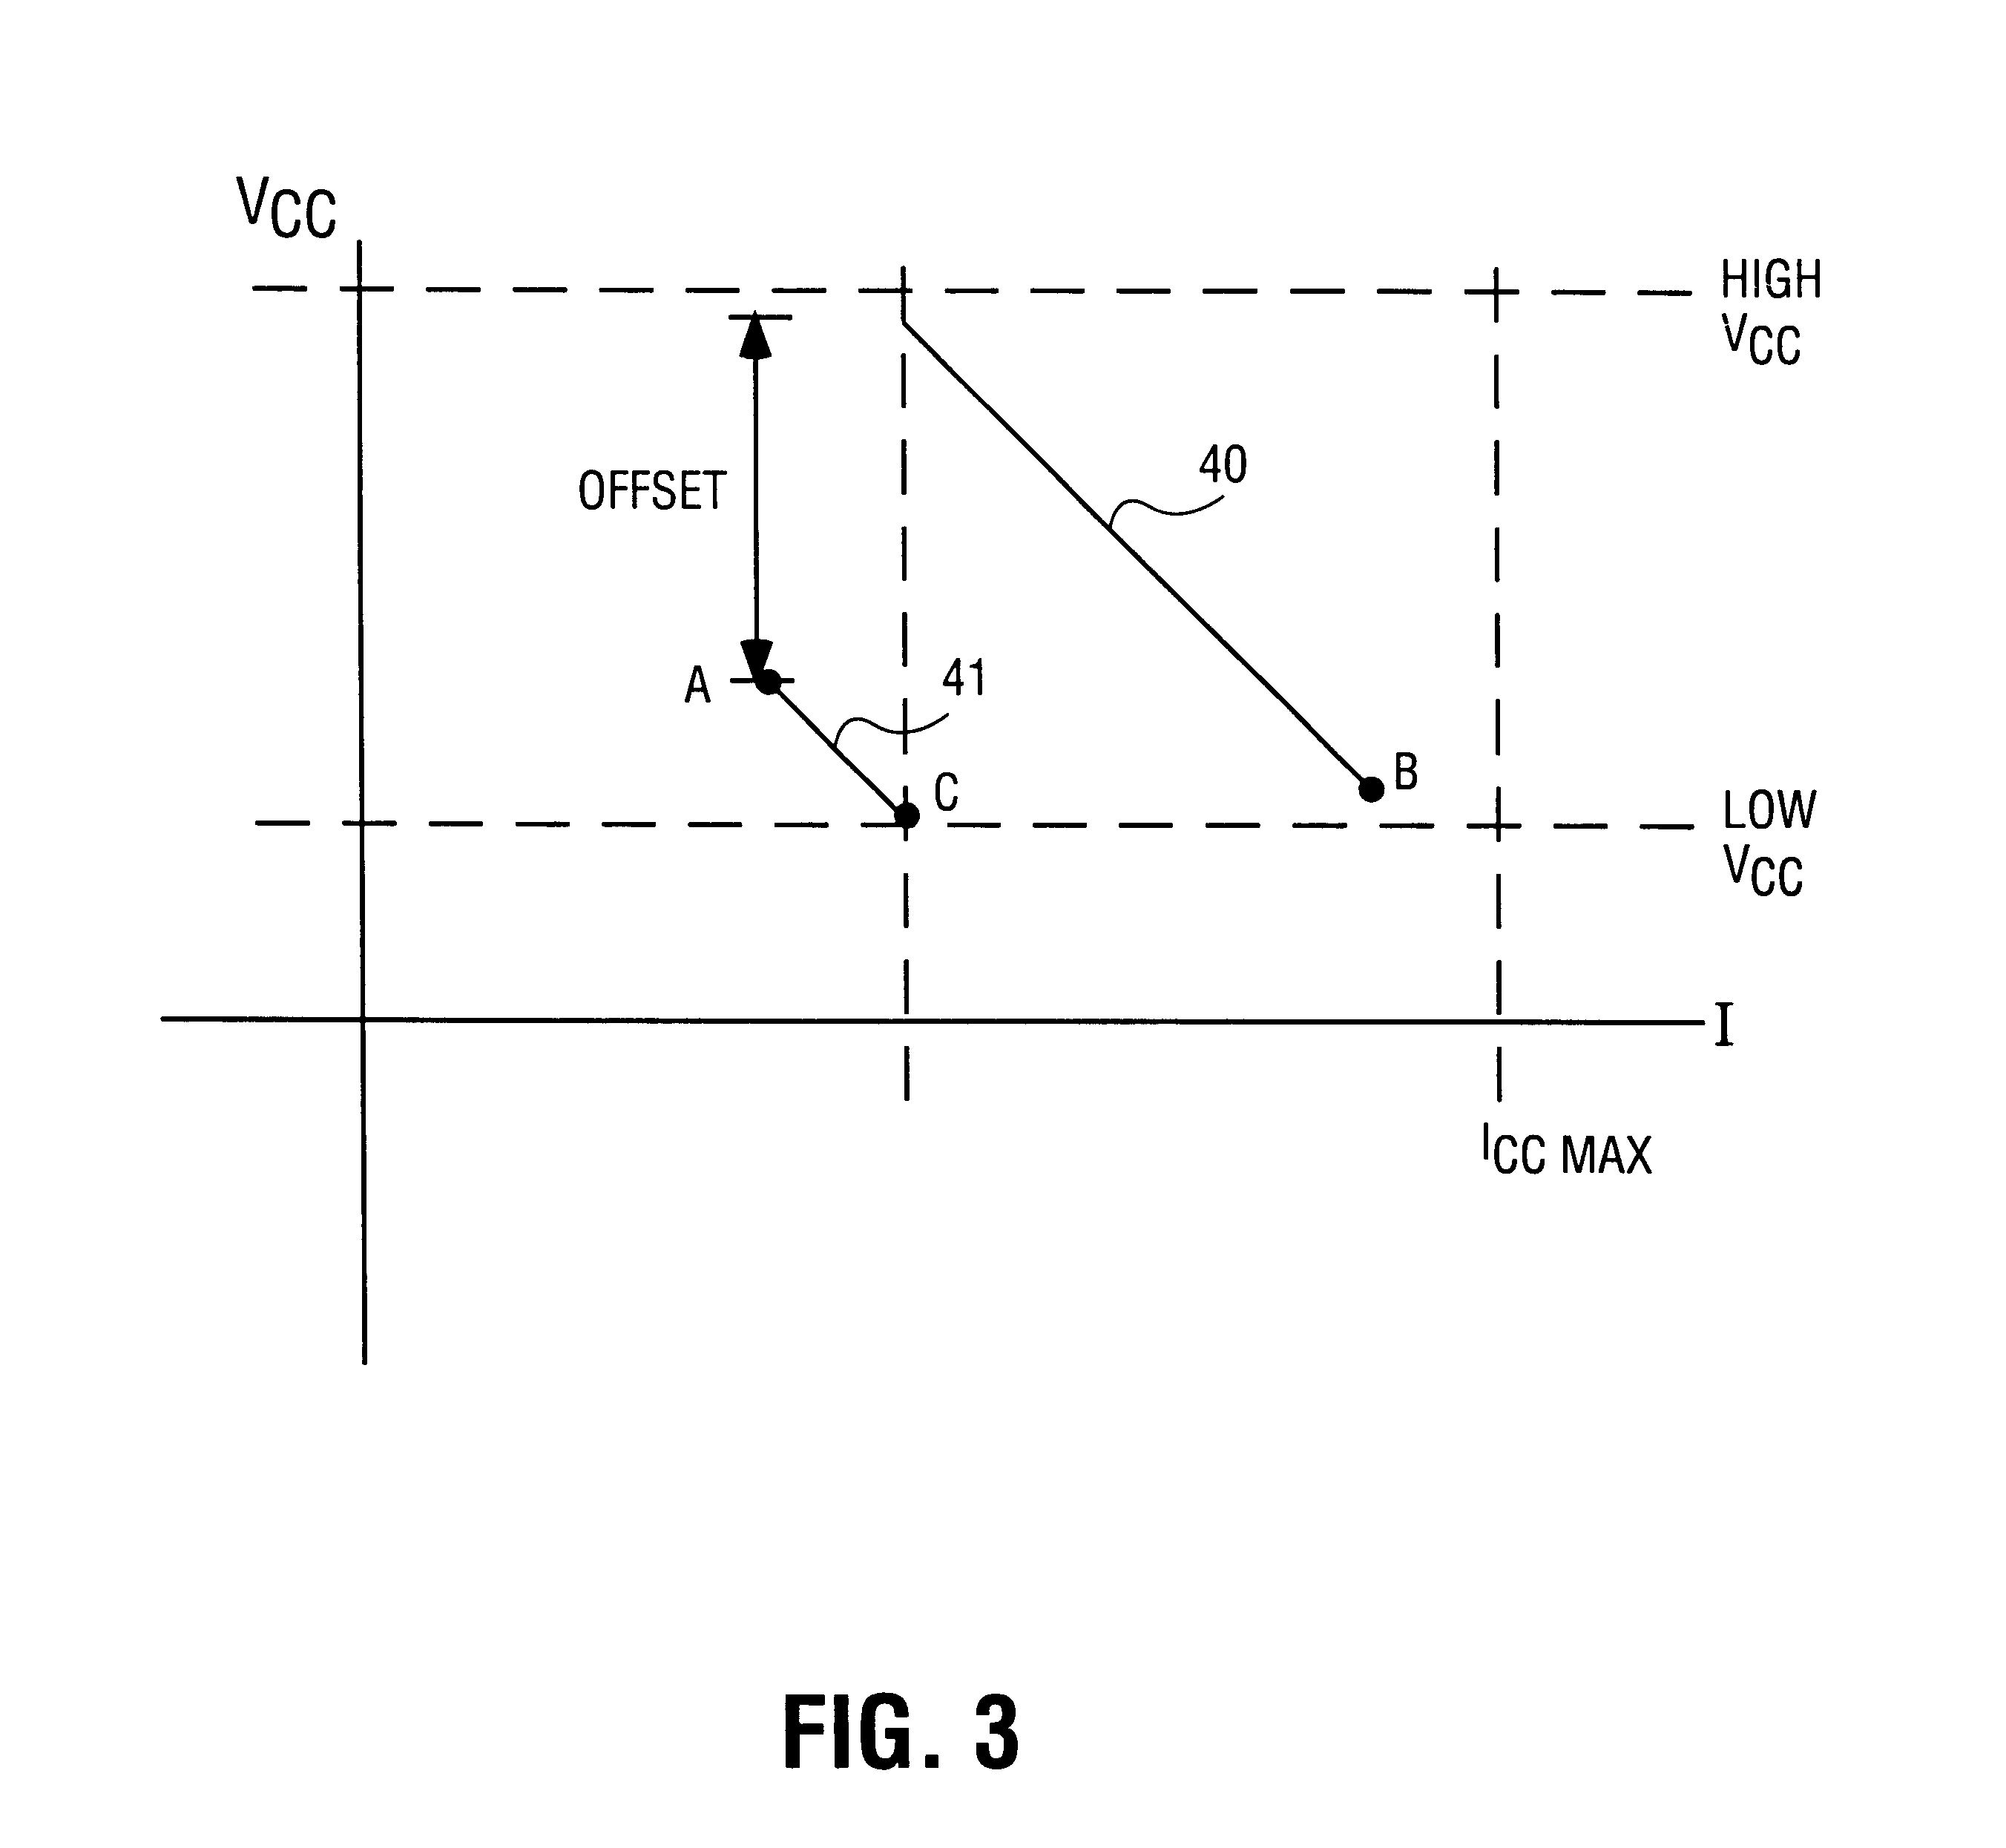 Auto-calibrating voltage regulator with dynamic set-point capability